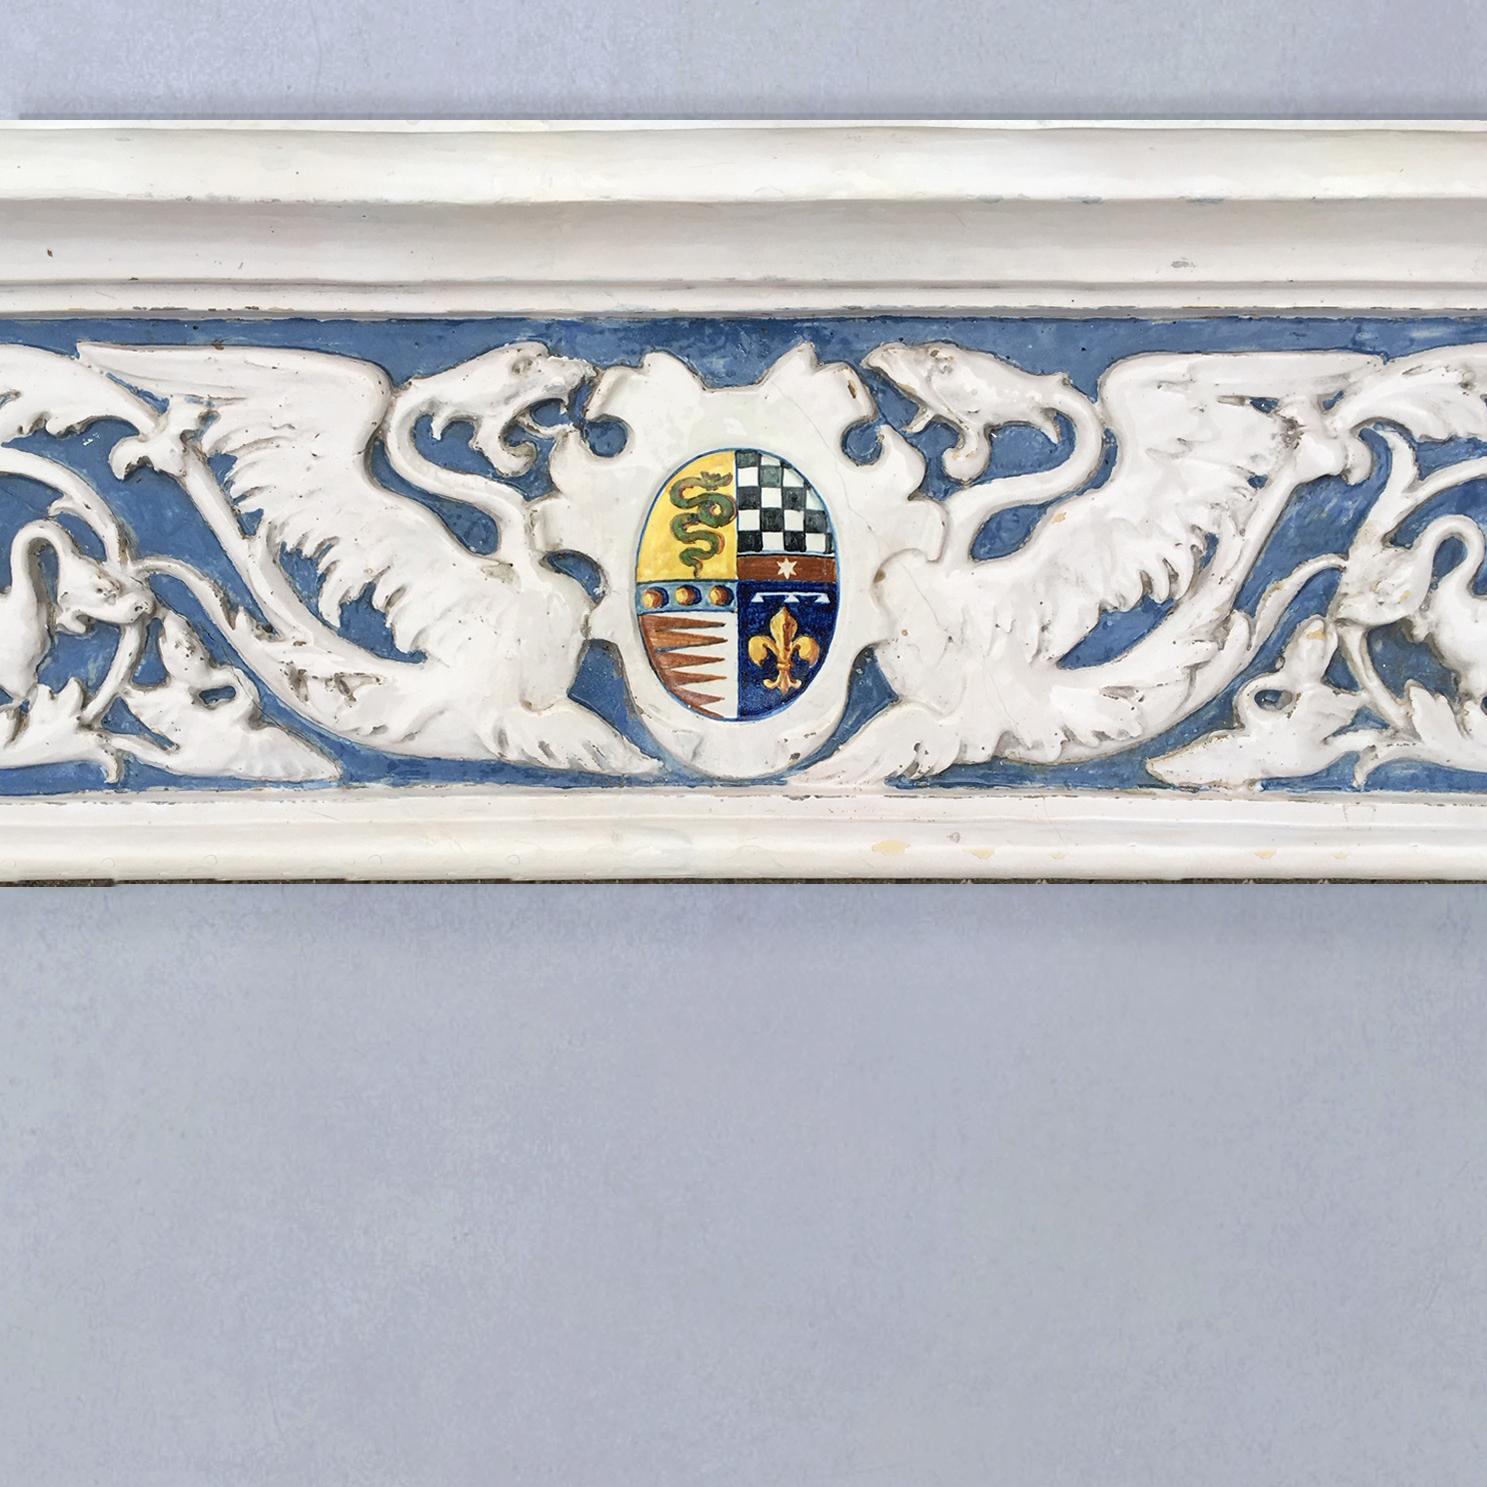 This exceptional and rare Della Robbia style fireplace was made in the 19th century by Ulisse Cantagalli, Italian leading designer of pottery and lustre ware. As far as known, there are only 3 of these fireplace in existence; one at Cantagalli’s